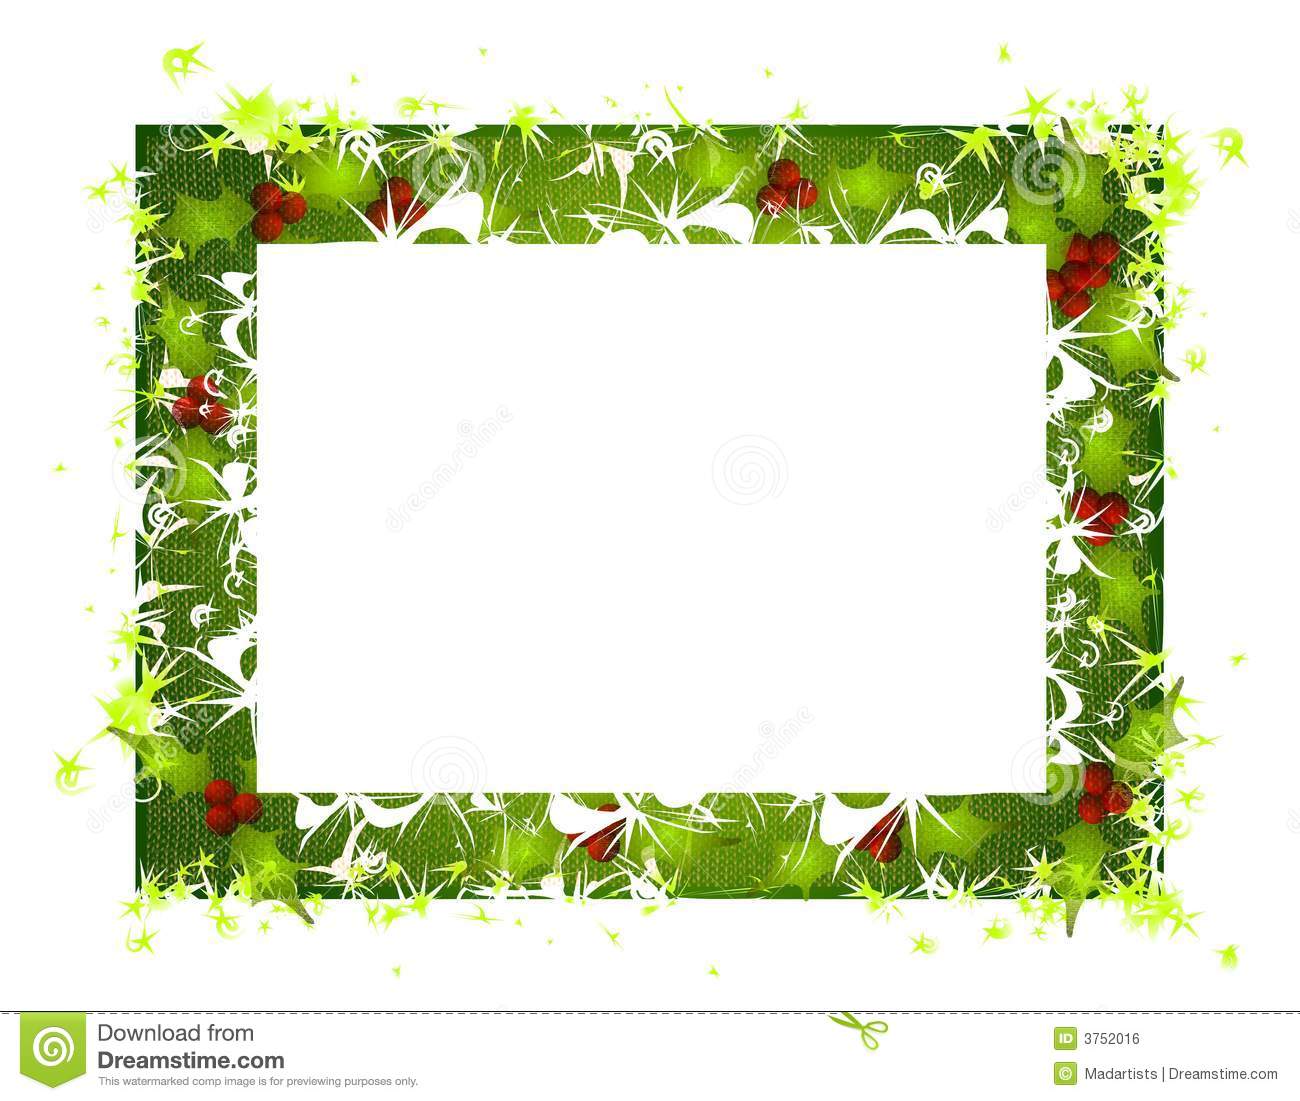 Rustic Holly Leaves Christmas Frame 2 Royalty Free Stock Image   Image